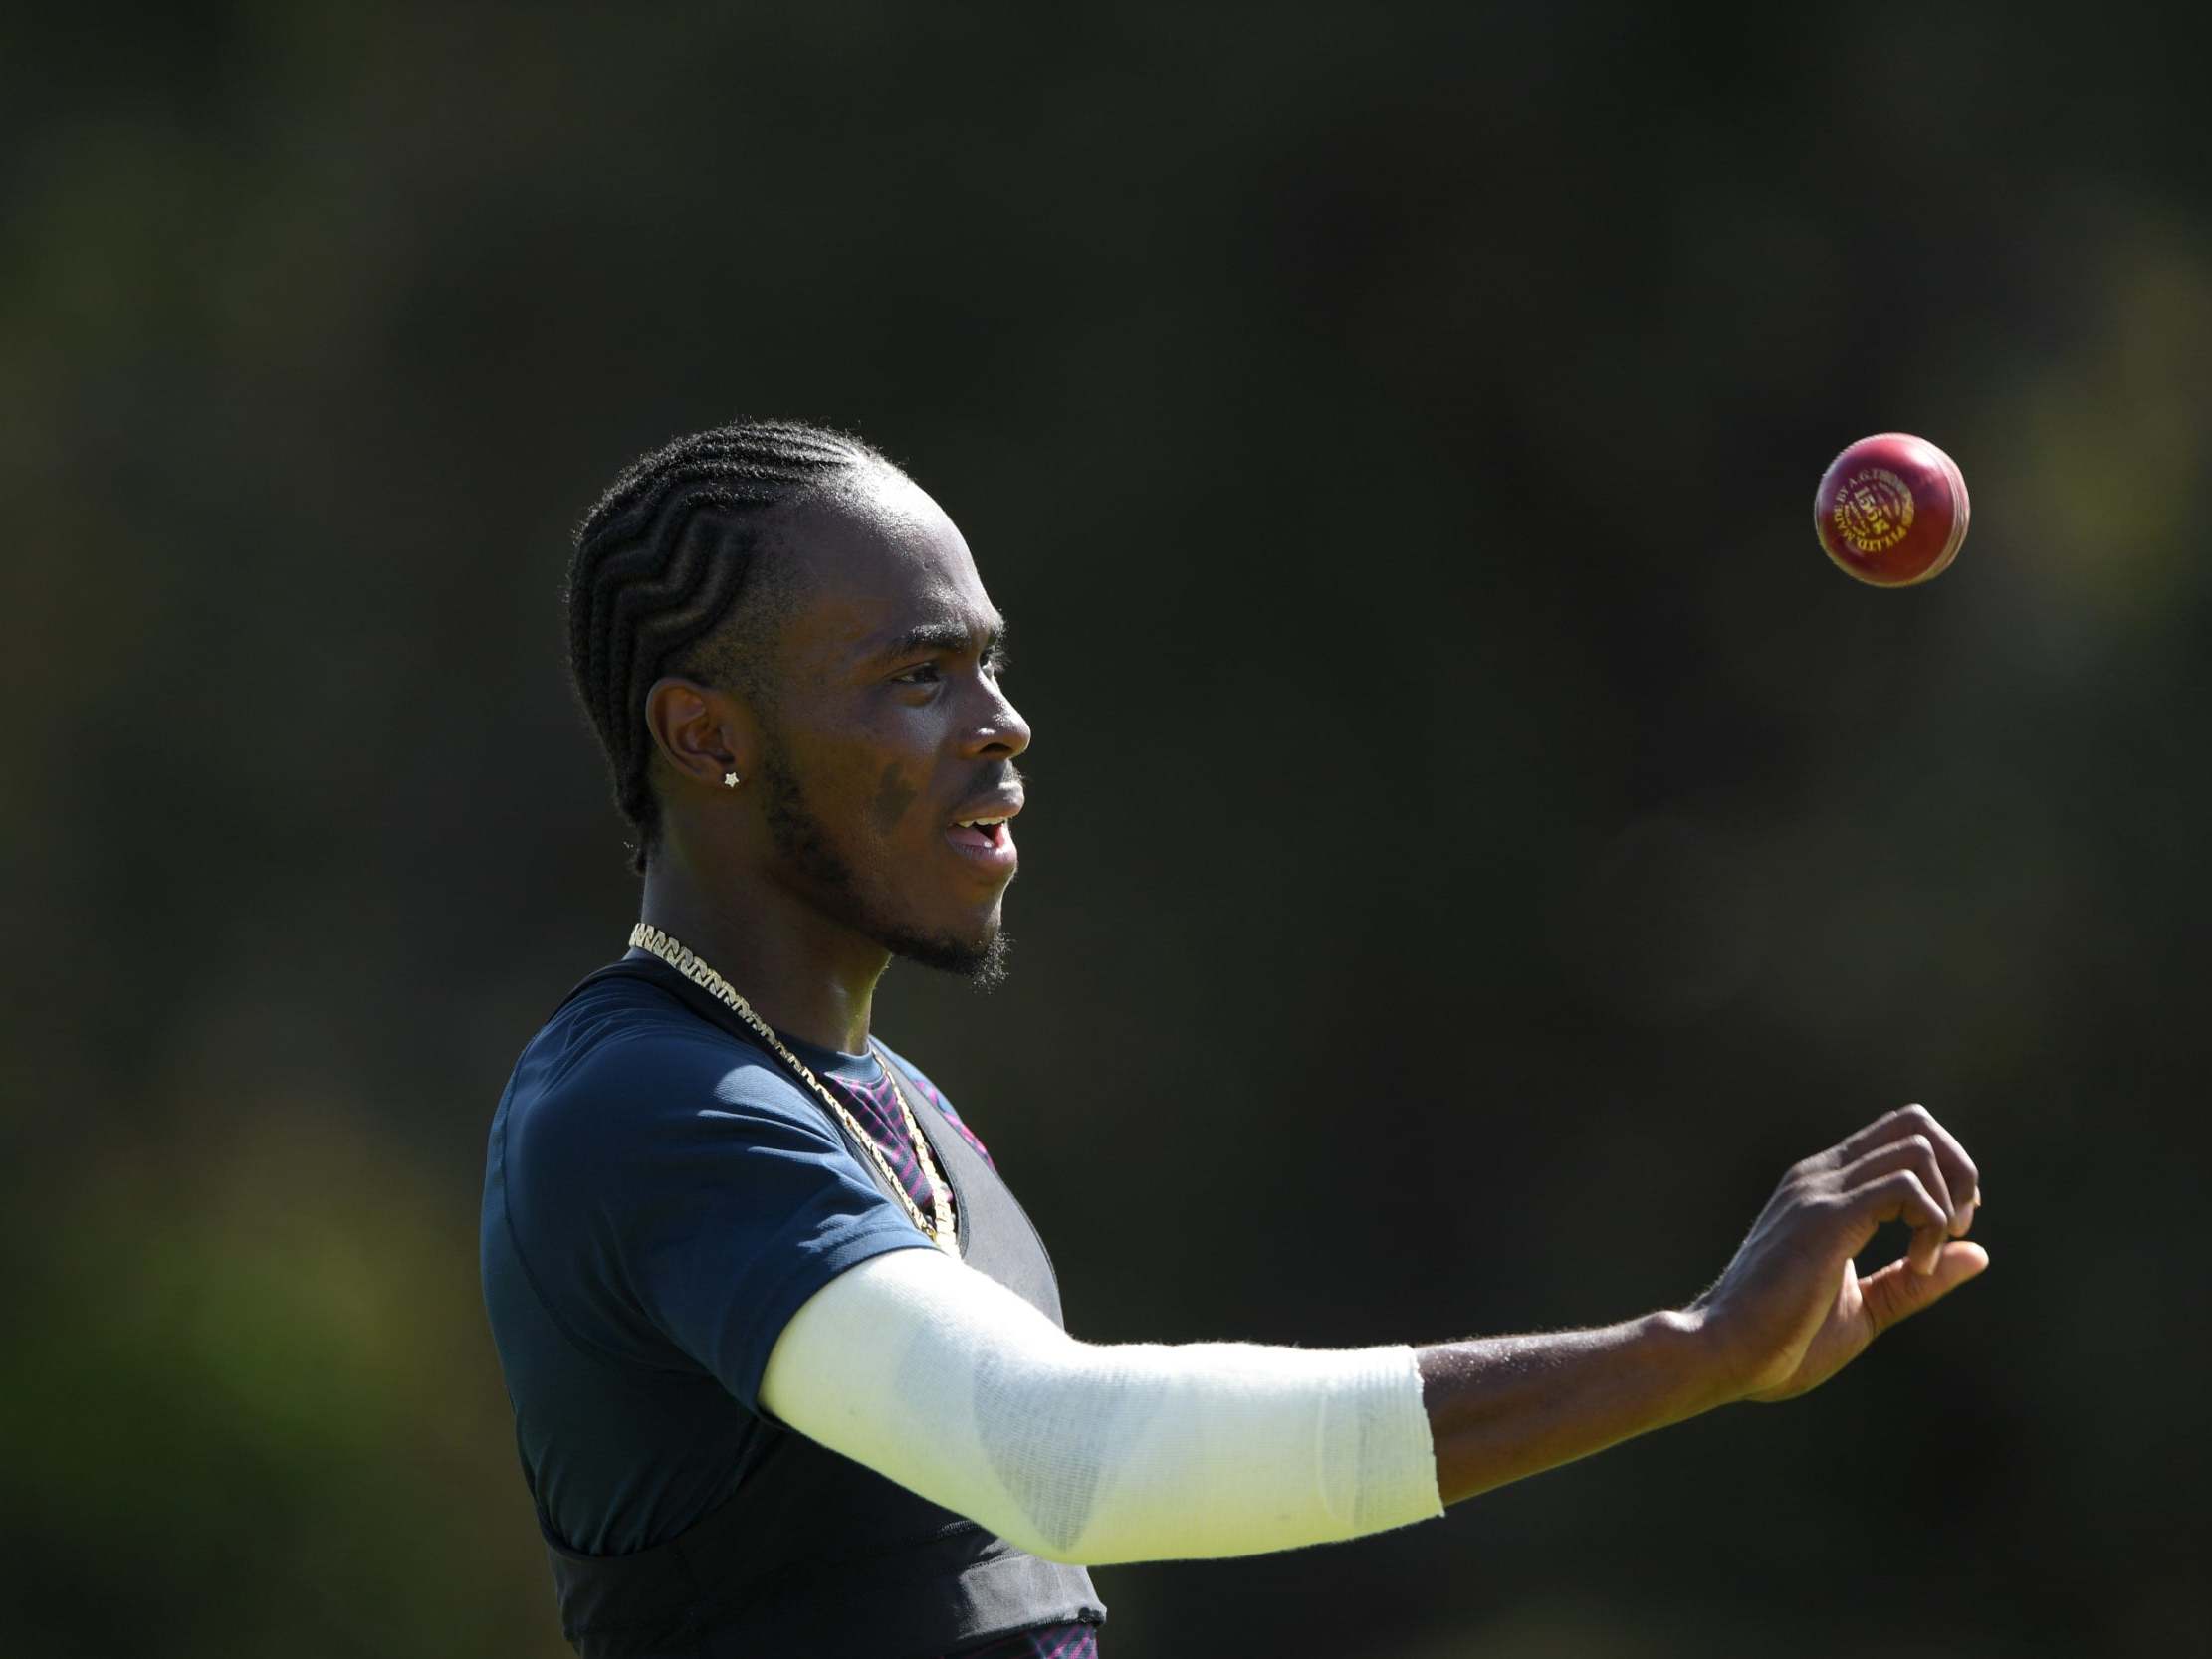 Jofra Archer revealed how he was racially abused on Instragram